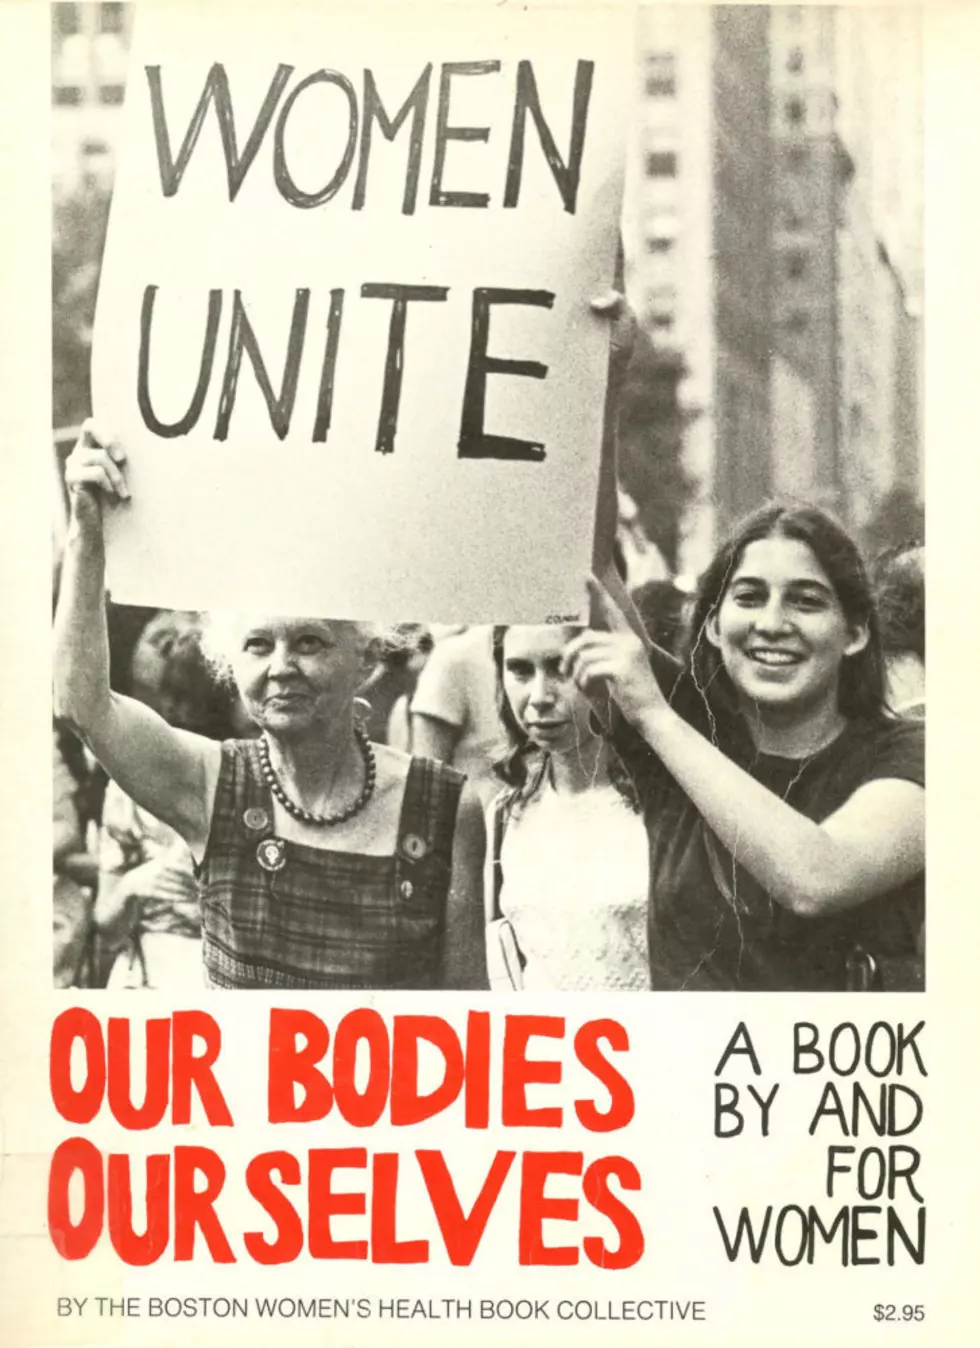 UM prof: Feminists today should look to &#8216;Our Bodies, Ourselves&#8217; for activist model